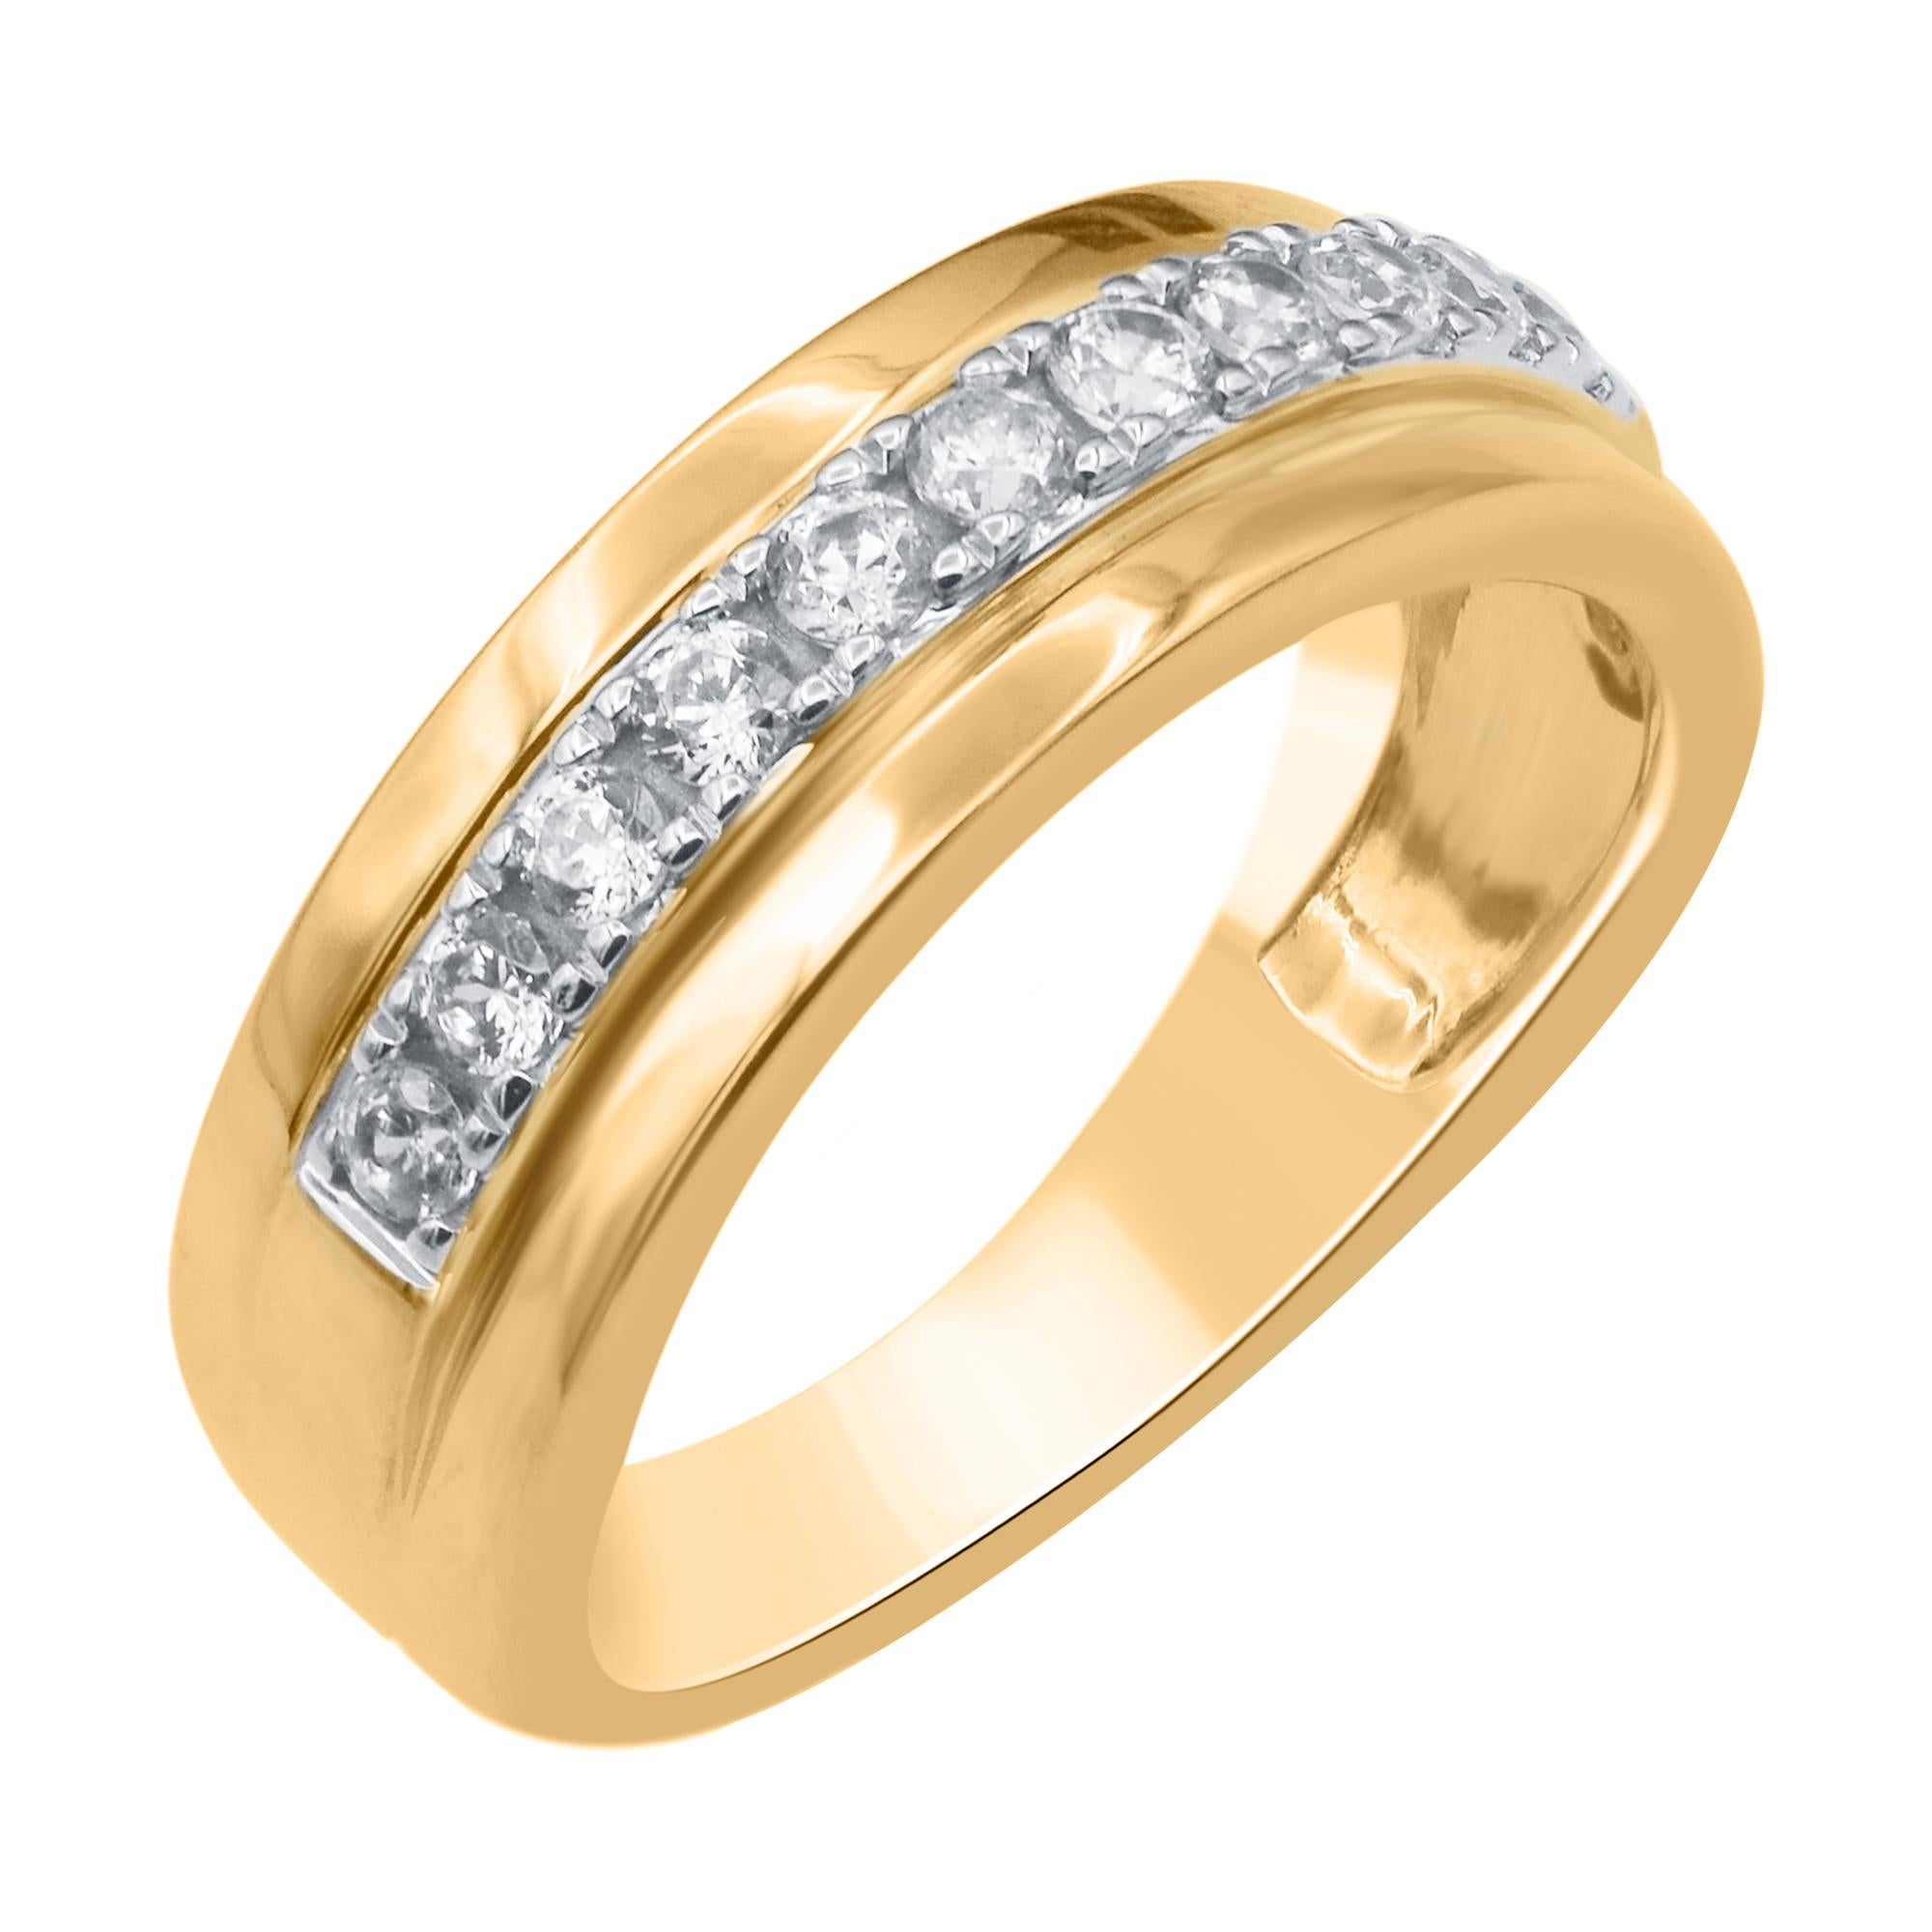 Surprise the man you love with this splendid diamond band in 18KT yellow gold. Eleven bold 0.50 carat brilliant cut diamonds glisten across the center. The white diamonds are graded as H-I color and I-2 clarity.